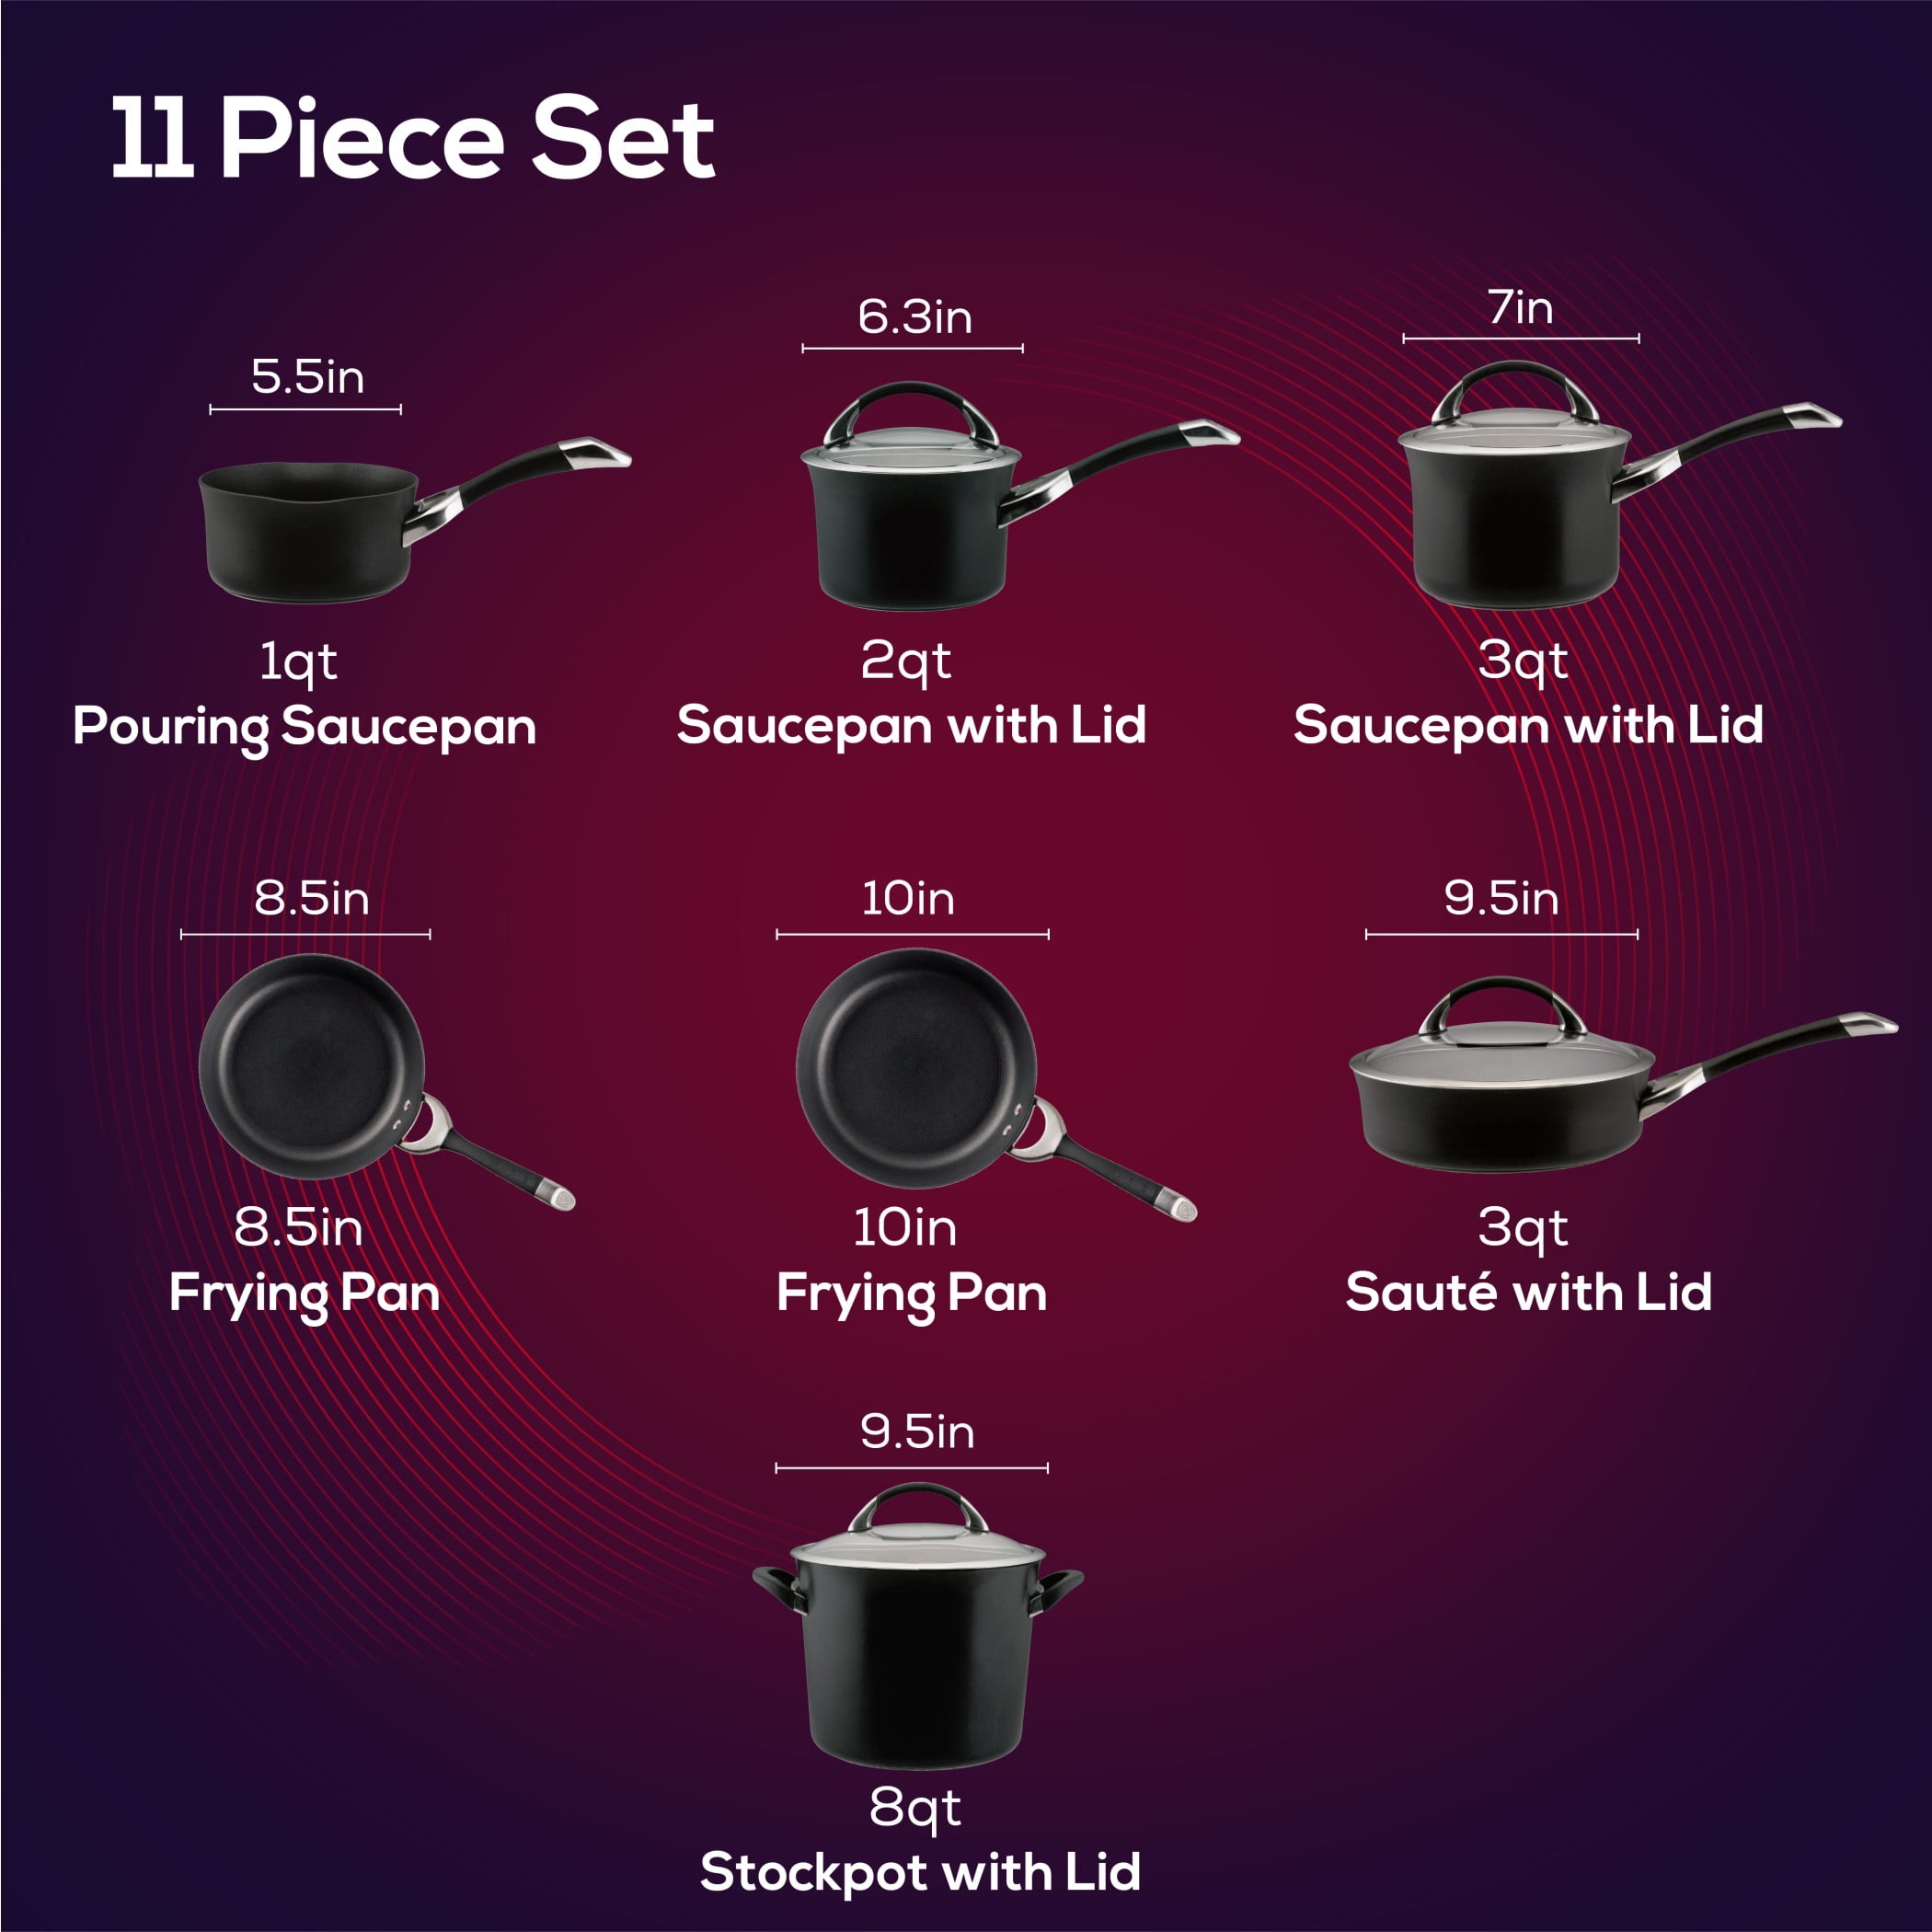 Circulon Symmetry Chocolate Hard-anodized Nonstick 11-piece Cookware Set  (As Is Item) - Bed Bath & Beyond - 31441456